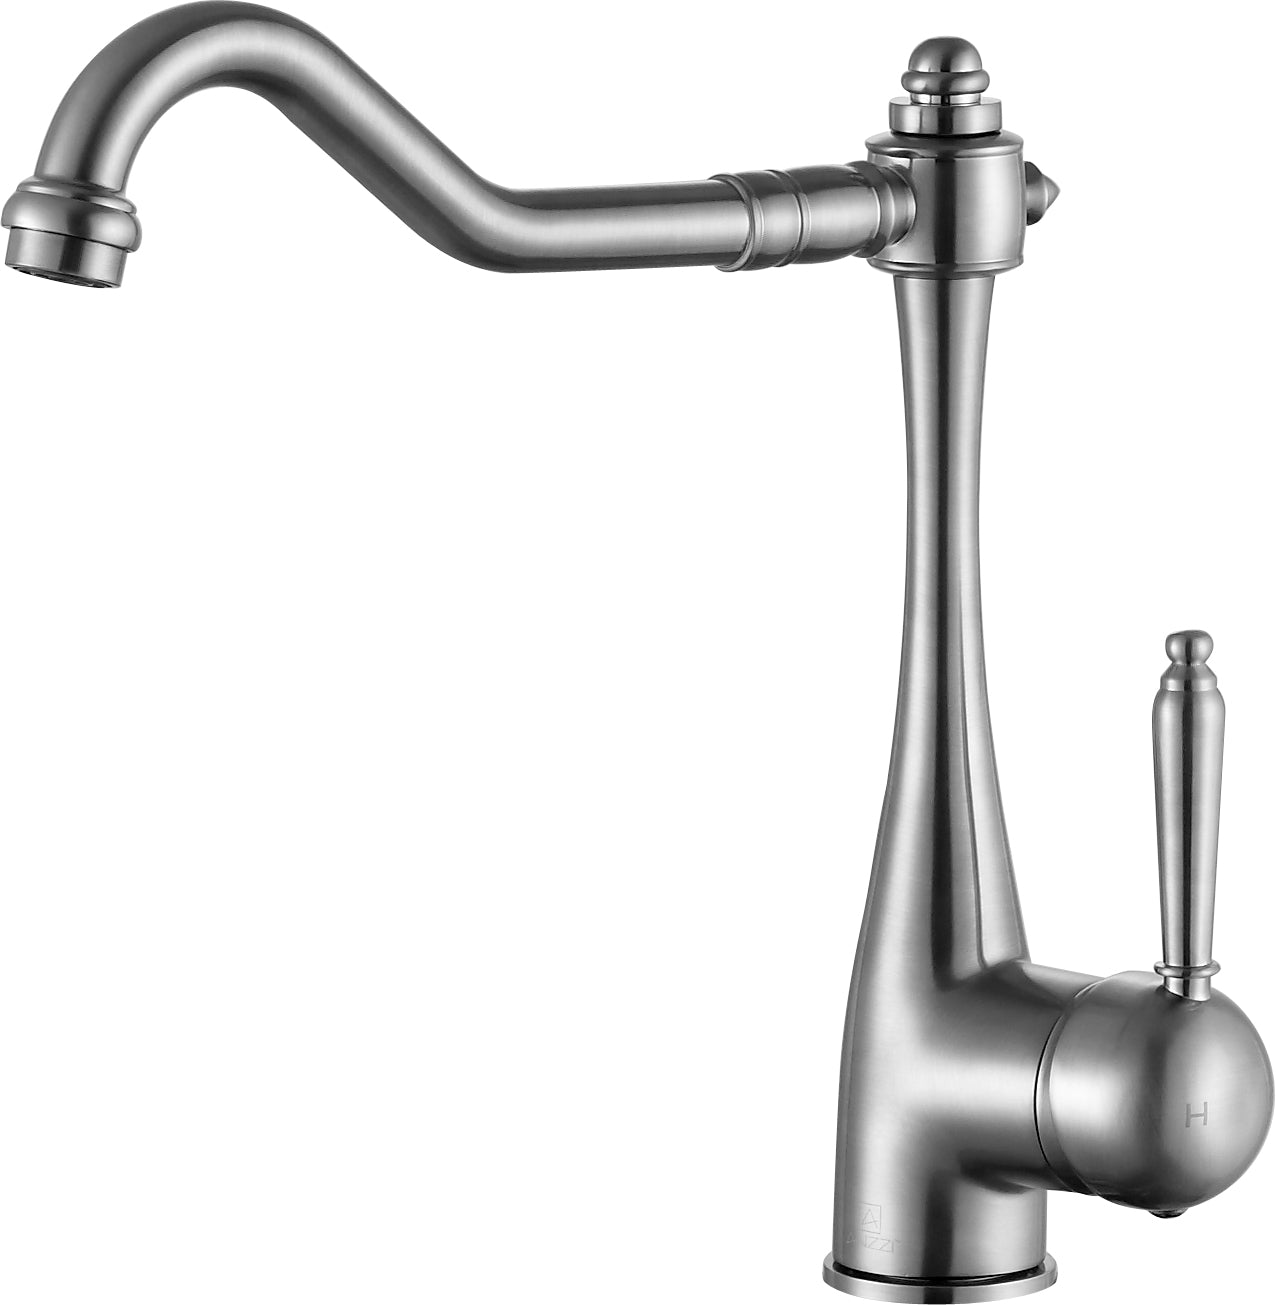 KF-AZ198BN - Patriarch Single Handle Standard Kitchen Faucet in Brushed Nickel